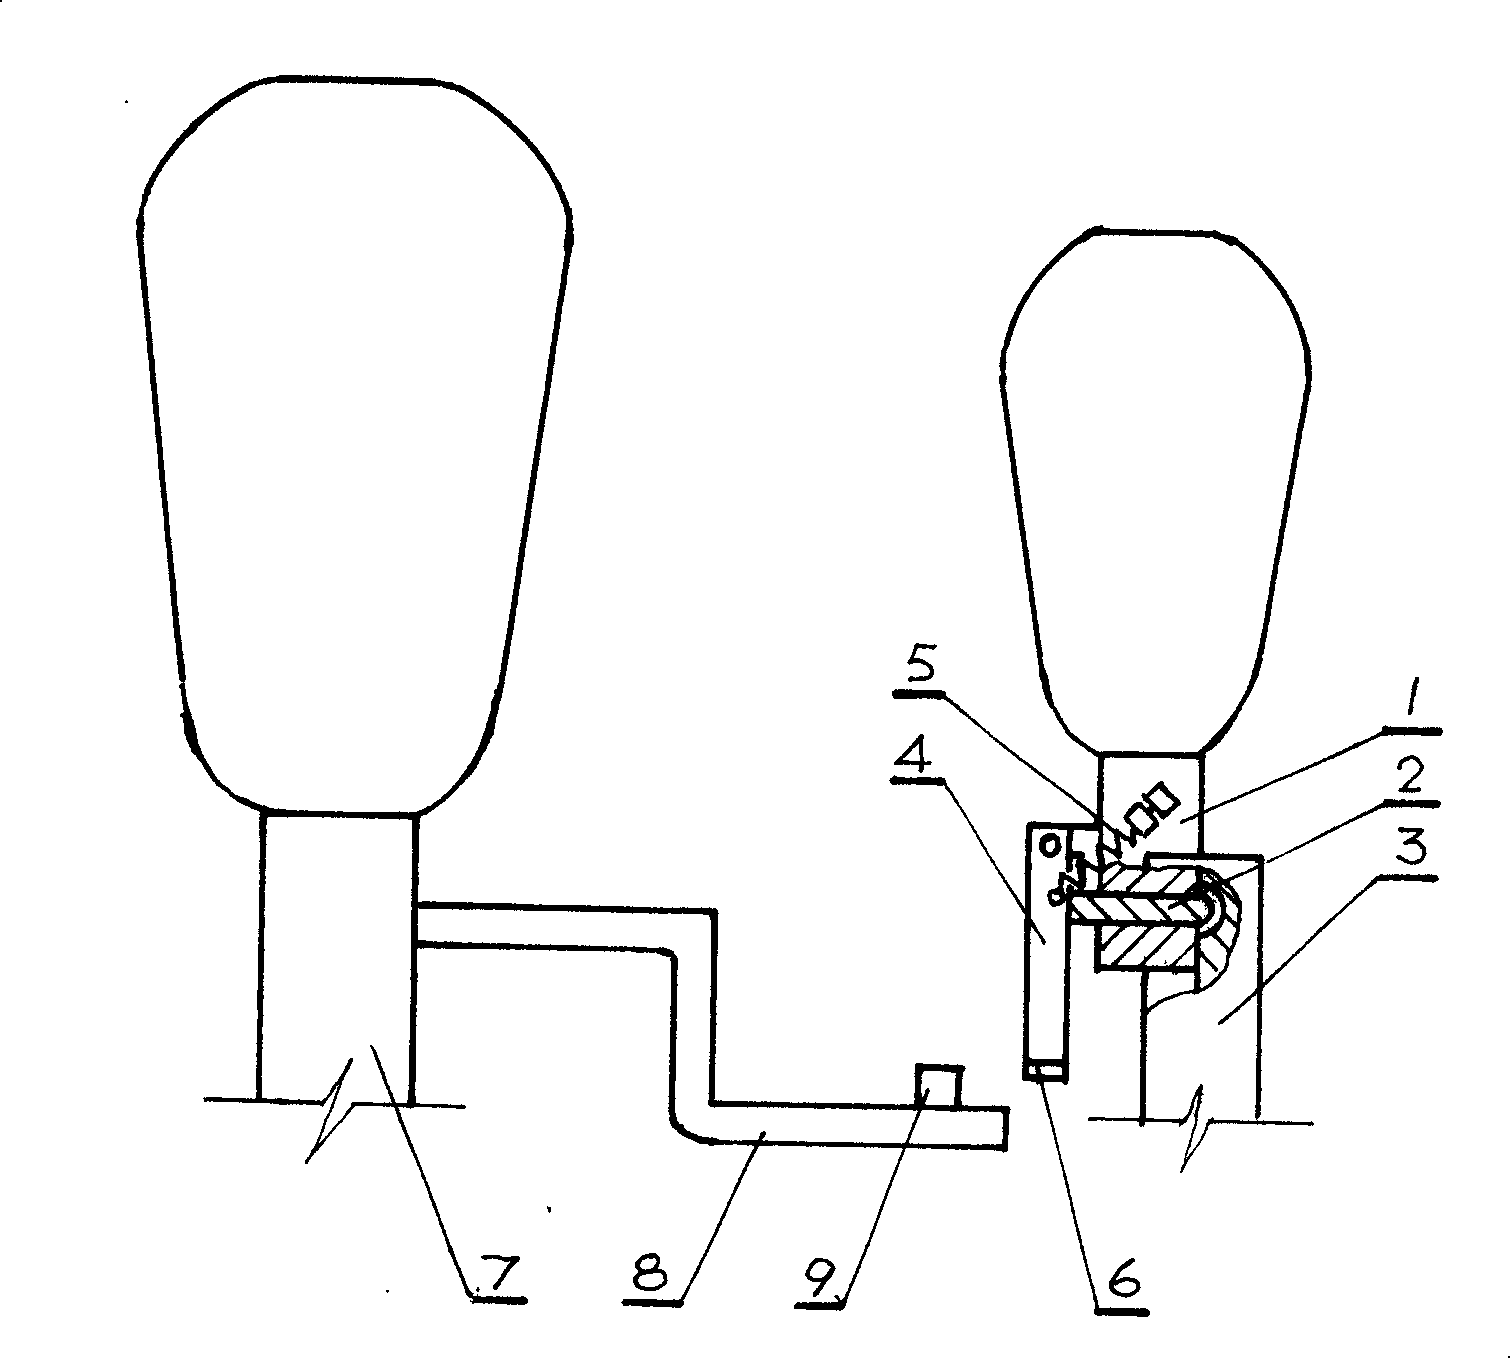 Device for converting into braking operation after stepping gasoline throttle as brake mistakenly